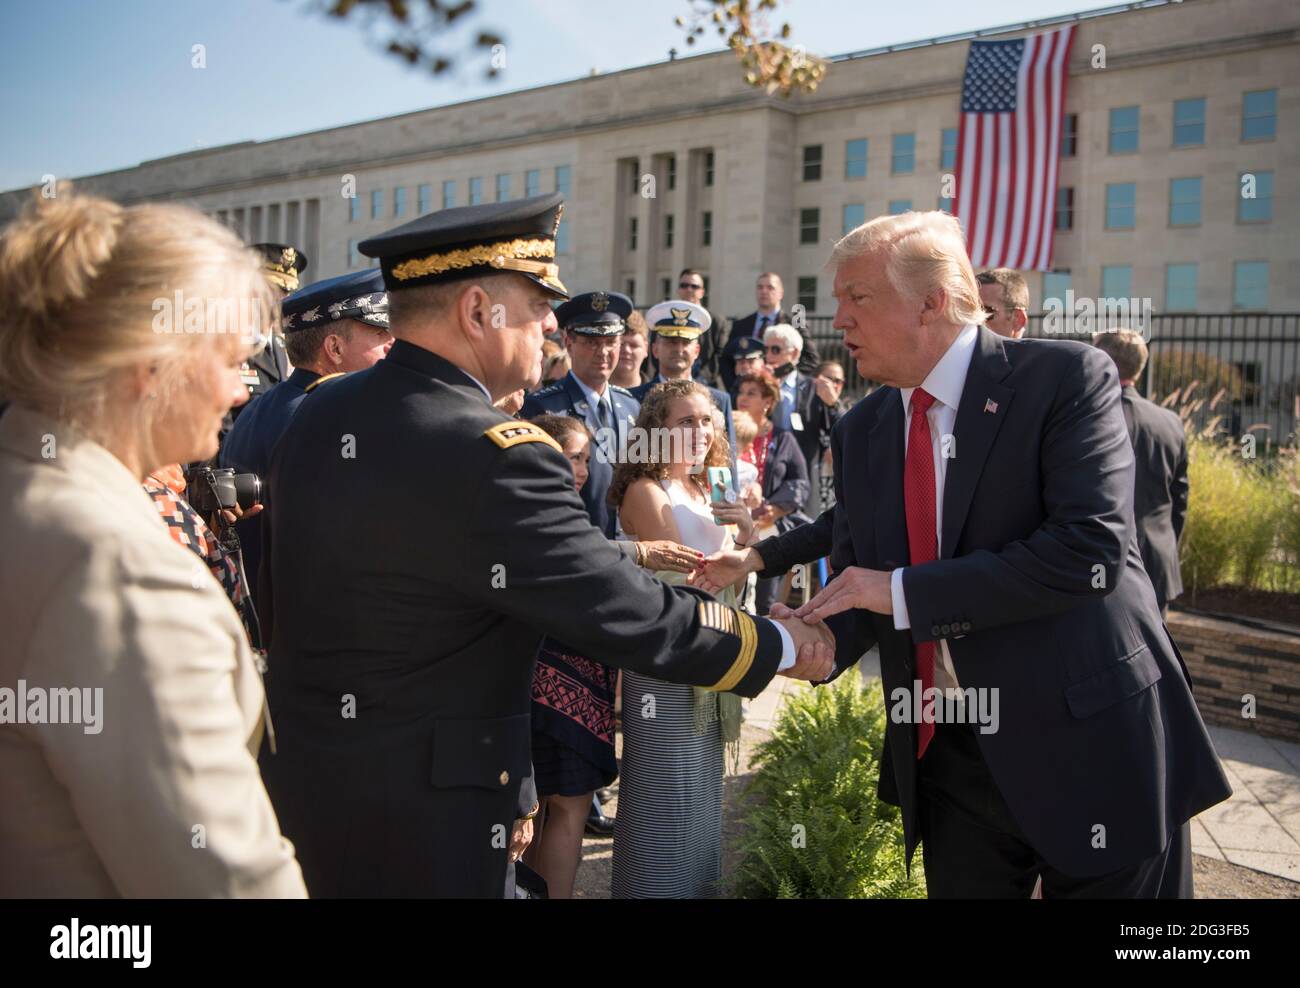 U.S. President Donald Trump greets Army Chief of Staff Mark Milley before the start of the 9/11 Observance Ceremony at the Pentagon September 11, 2017 in Washington, DC. Stock Photo